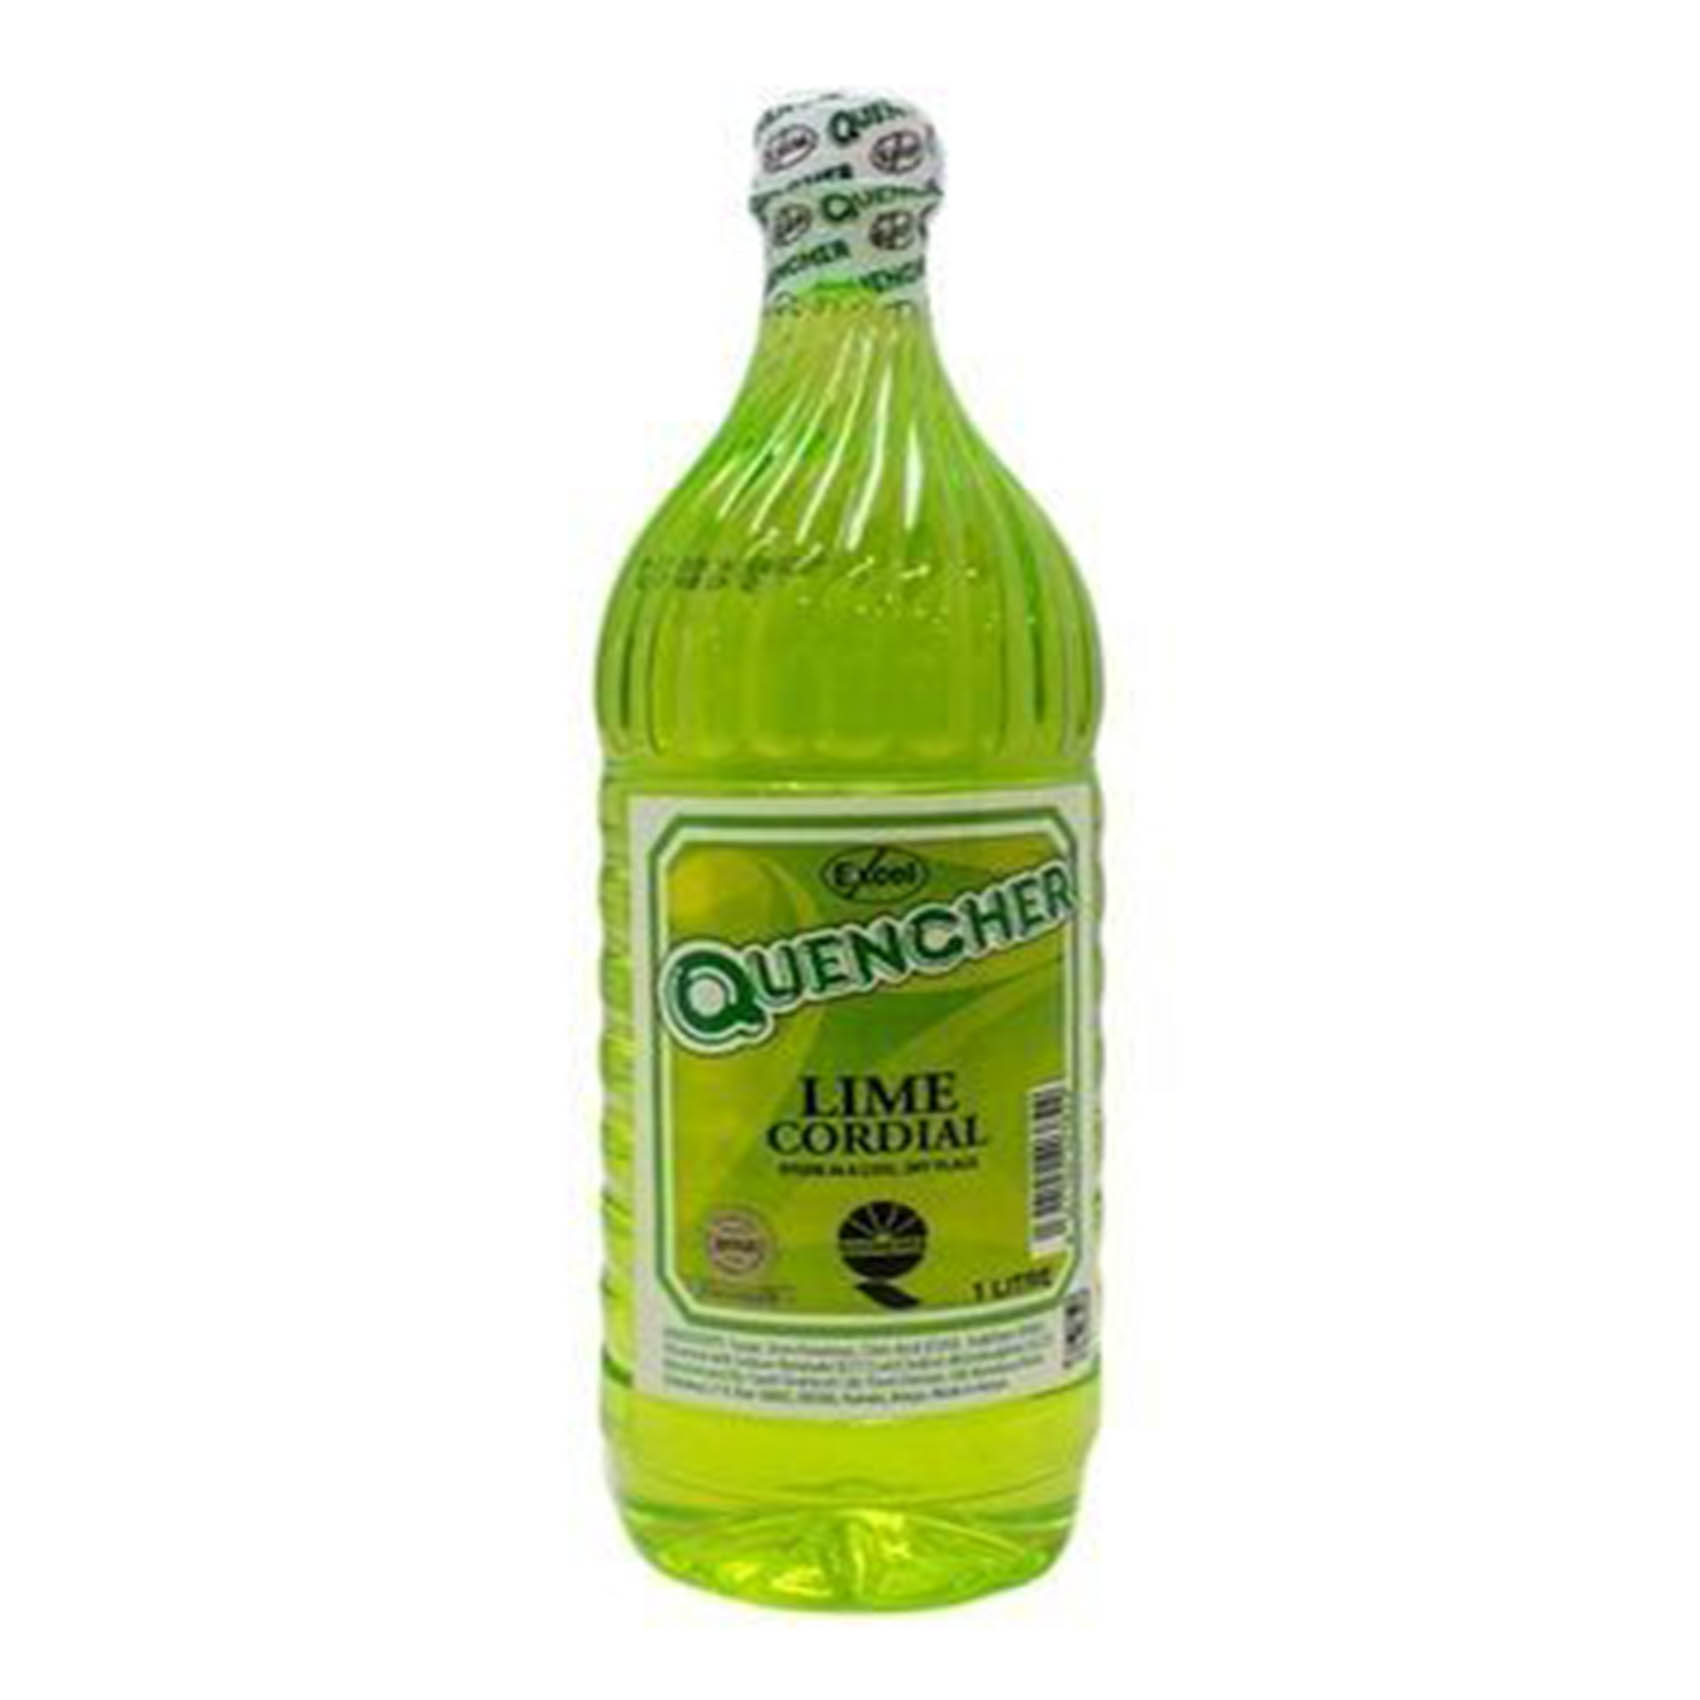 Quencher Lime Cordial Drink 1L